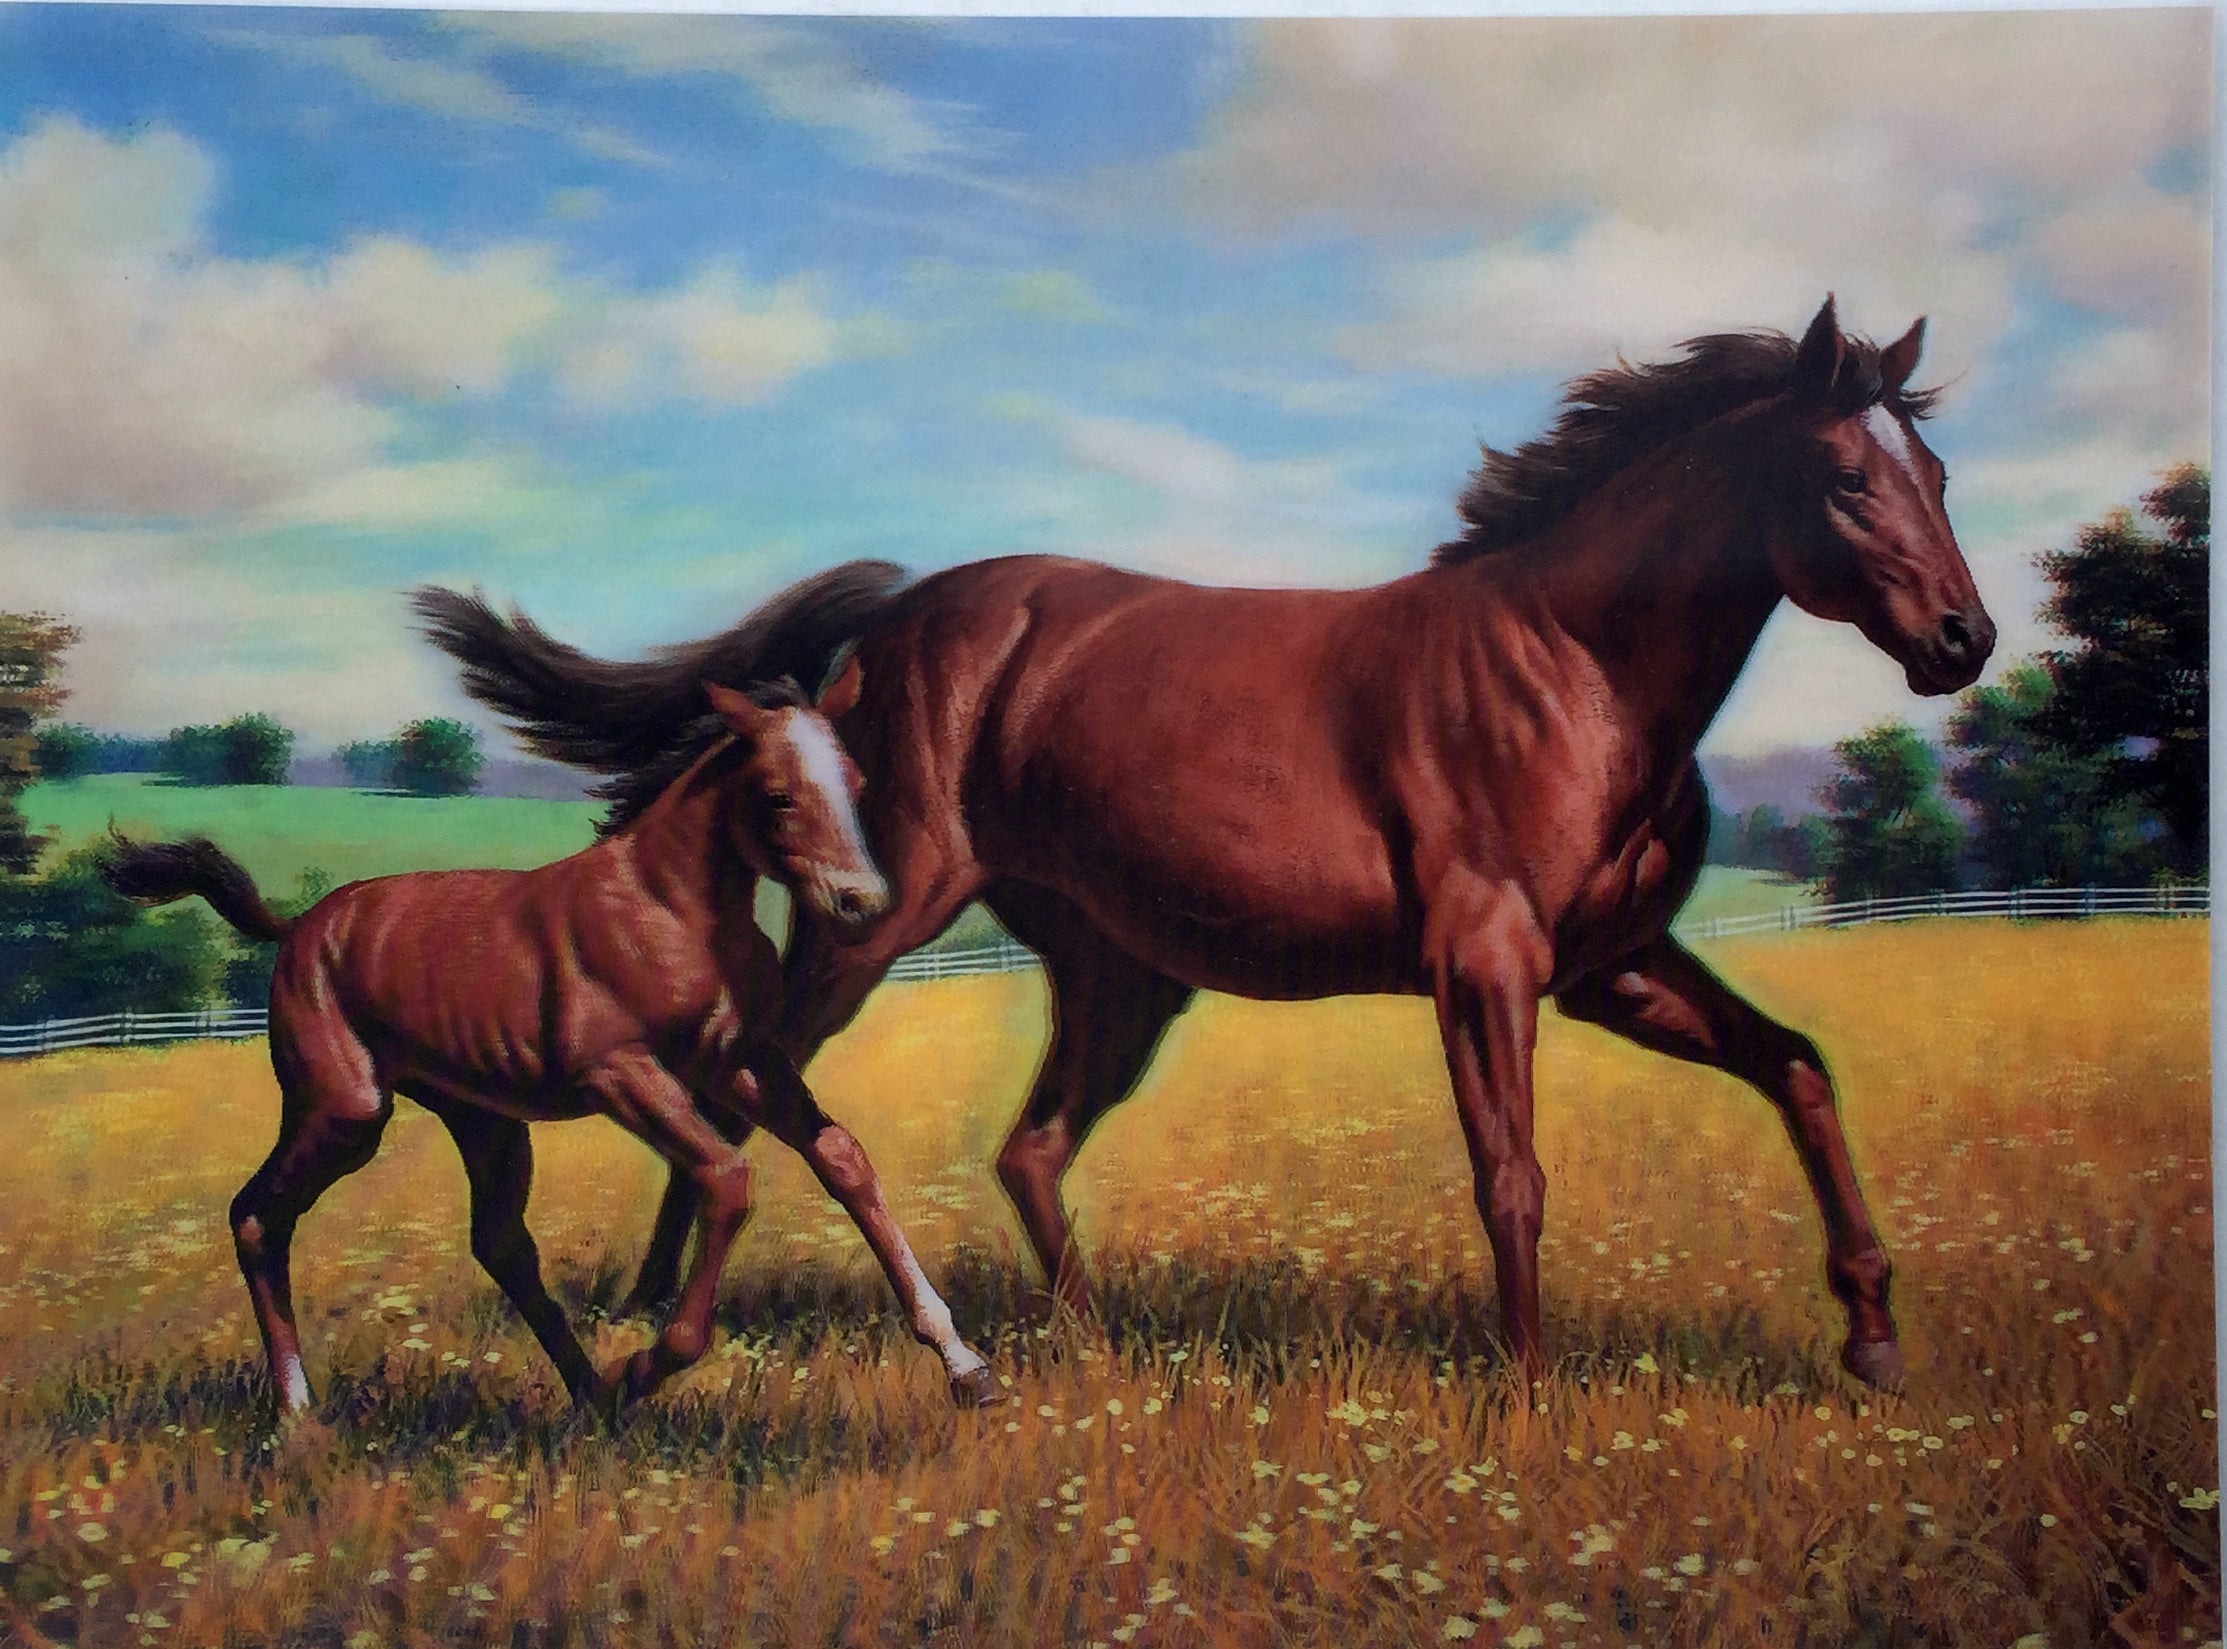 H 17 Brown Horse With Baby 3dddpictures Com